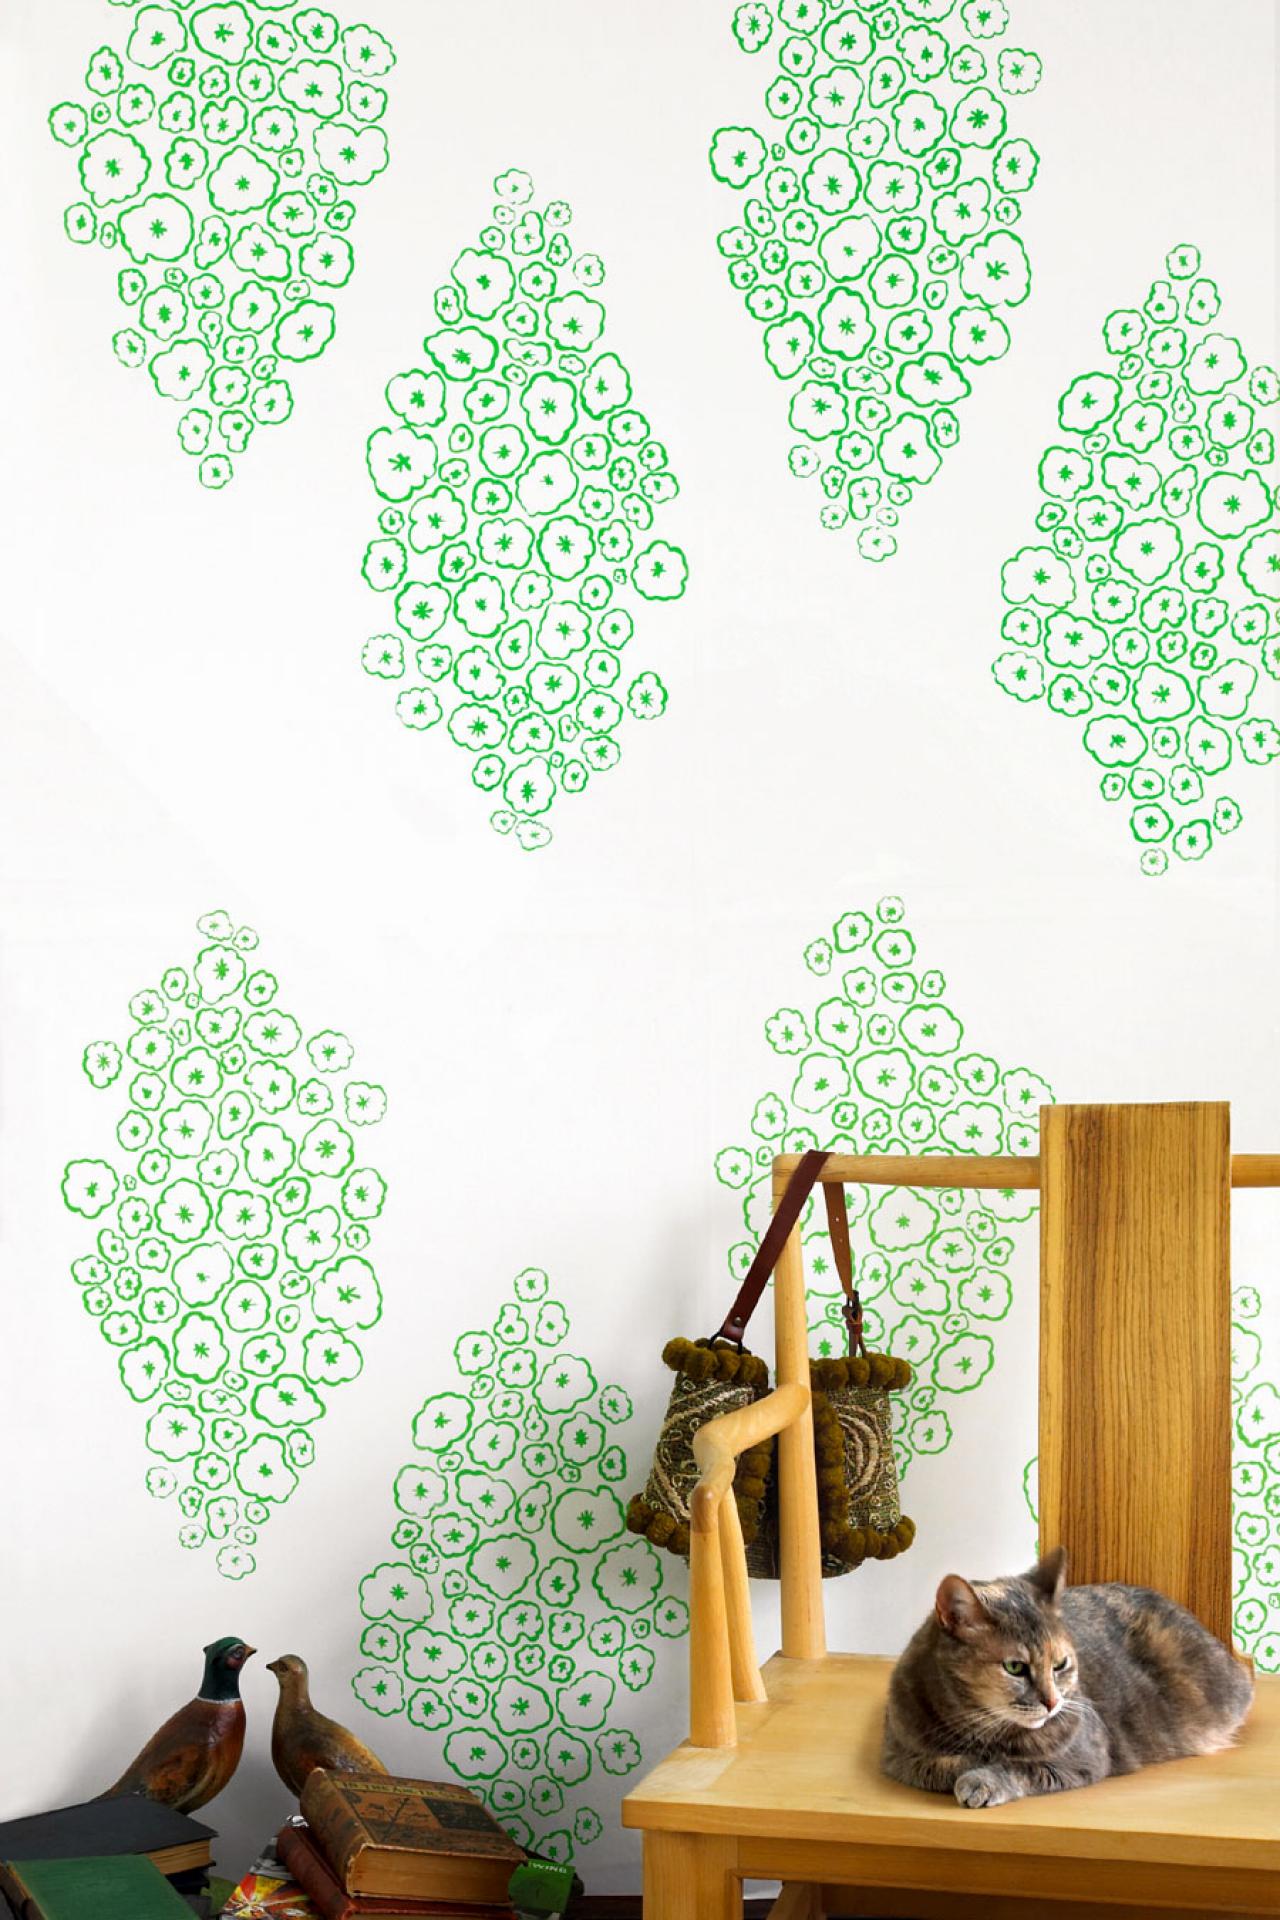 Pampered Wallpaper Use This Handprinted Design As Either A